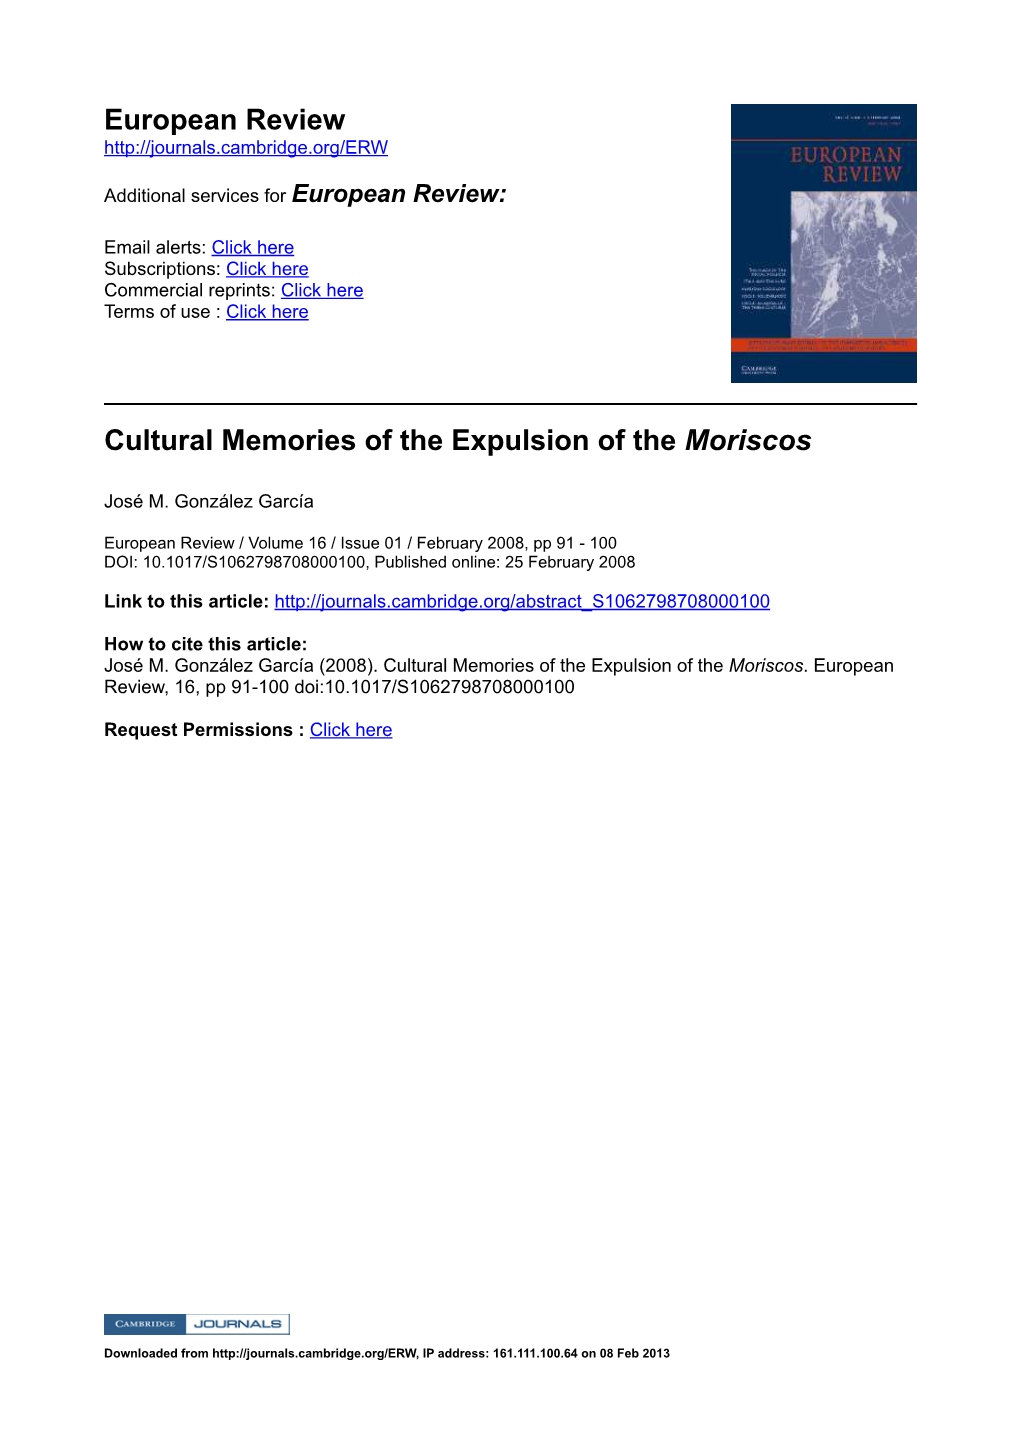 European Review Cultural Memories of the Expulsion of the Moriscos